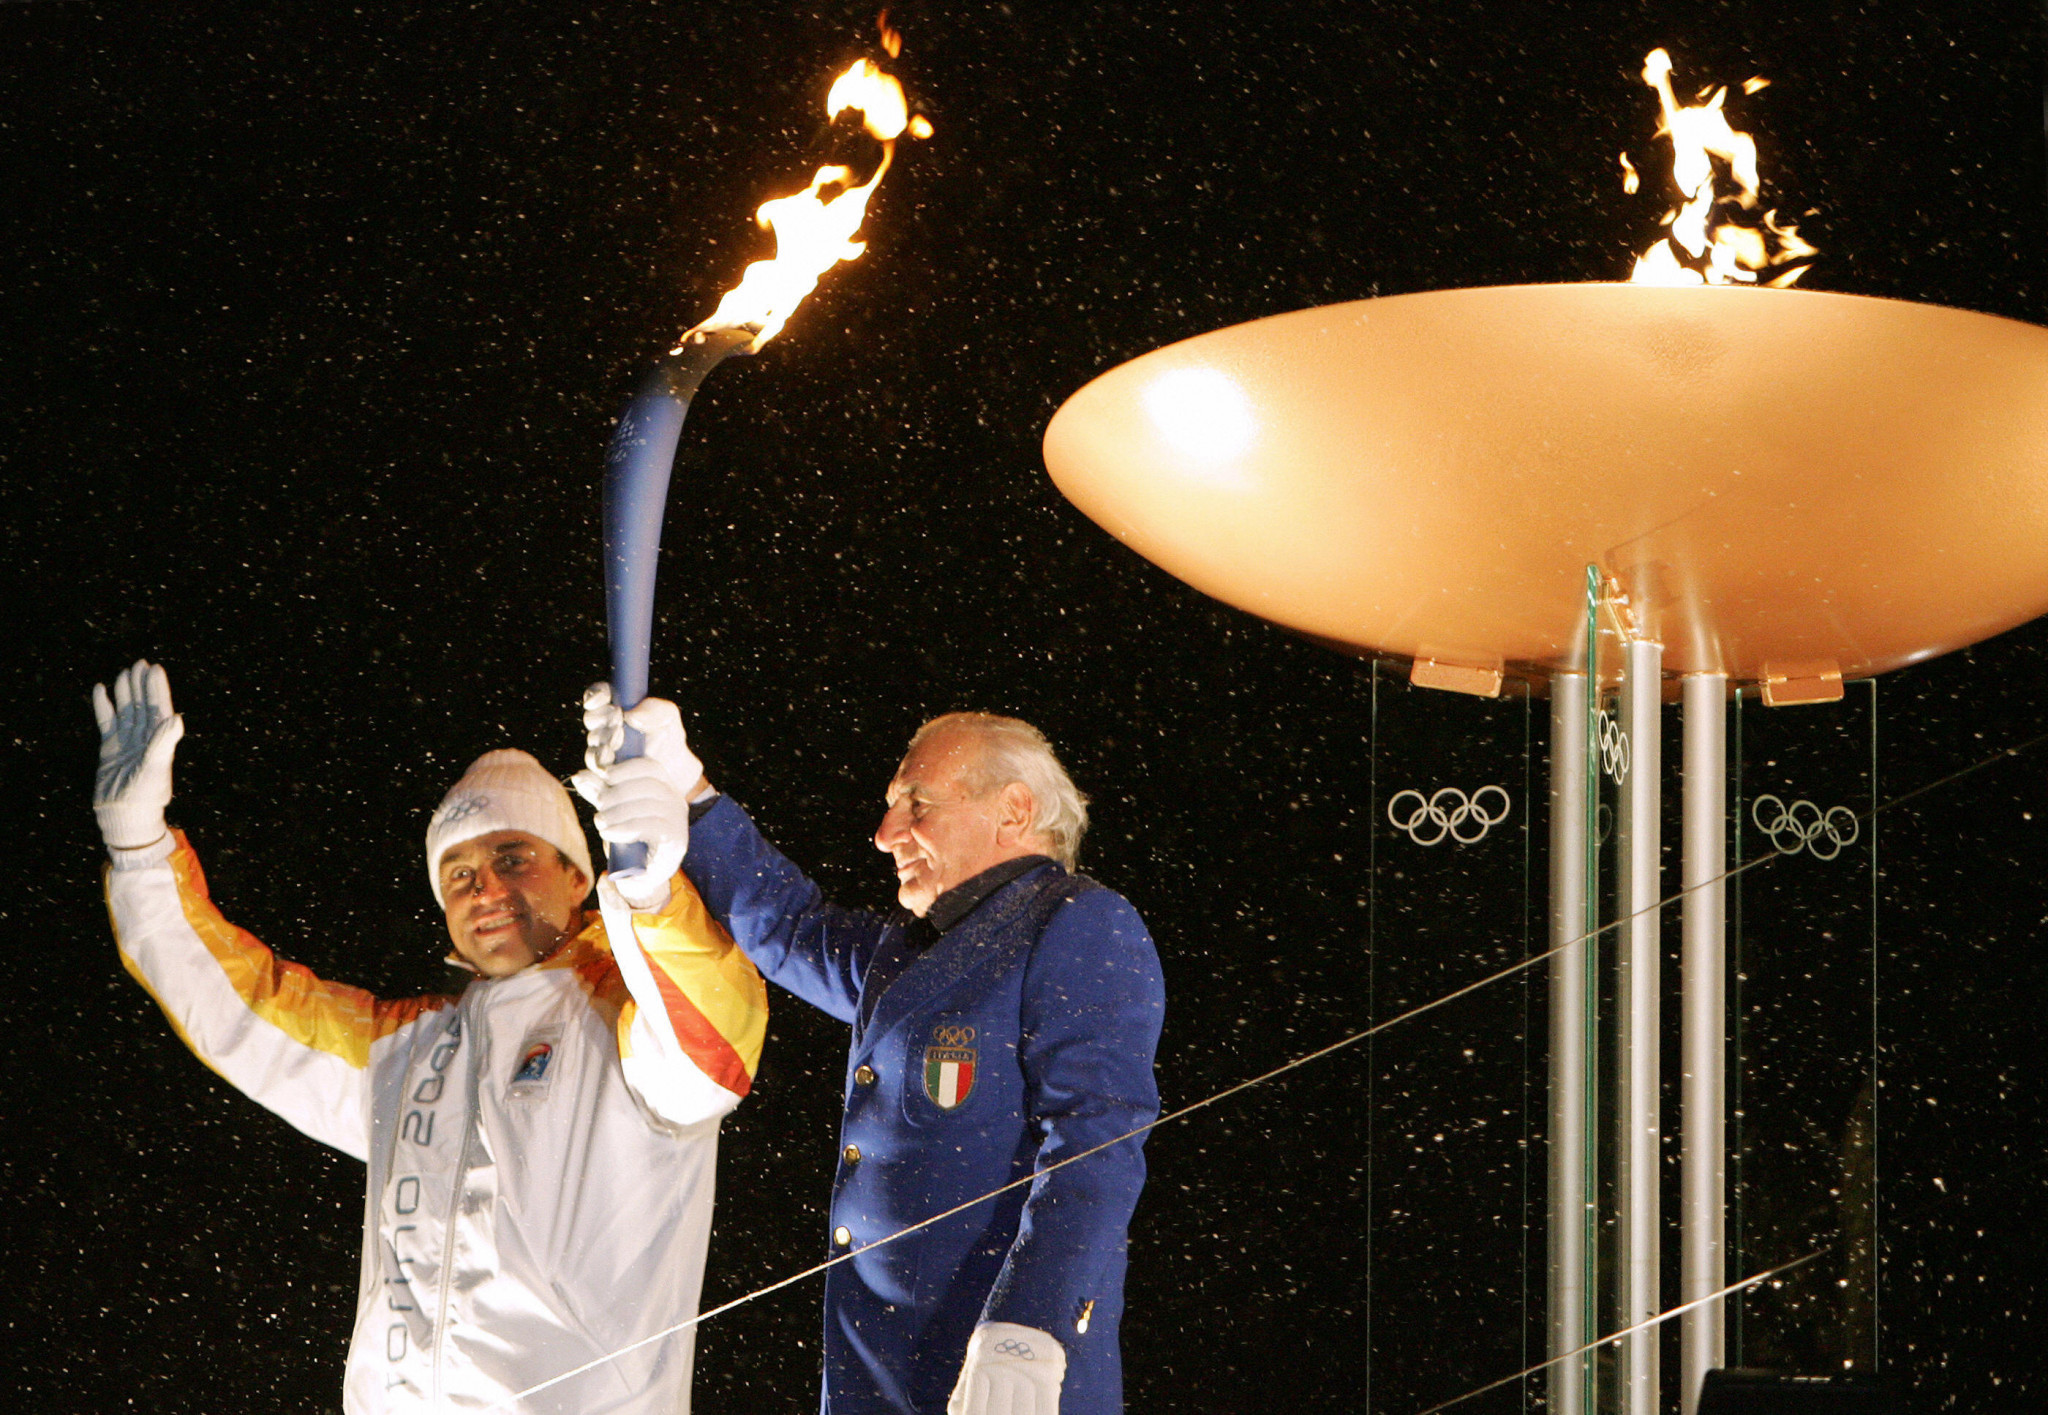 Guido Caroli, right, was the first athlete to light a Cauldron at a Winter Olympics in 1956 ©Getty Images